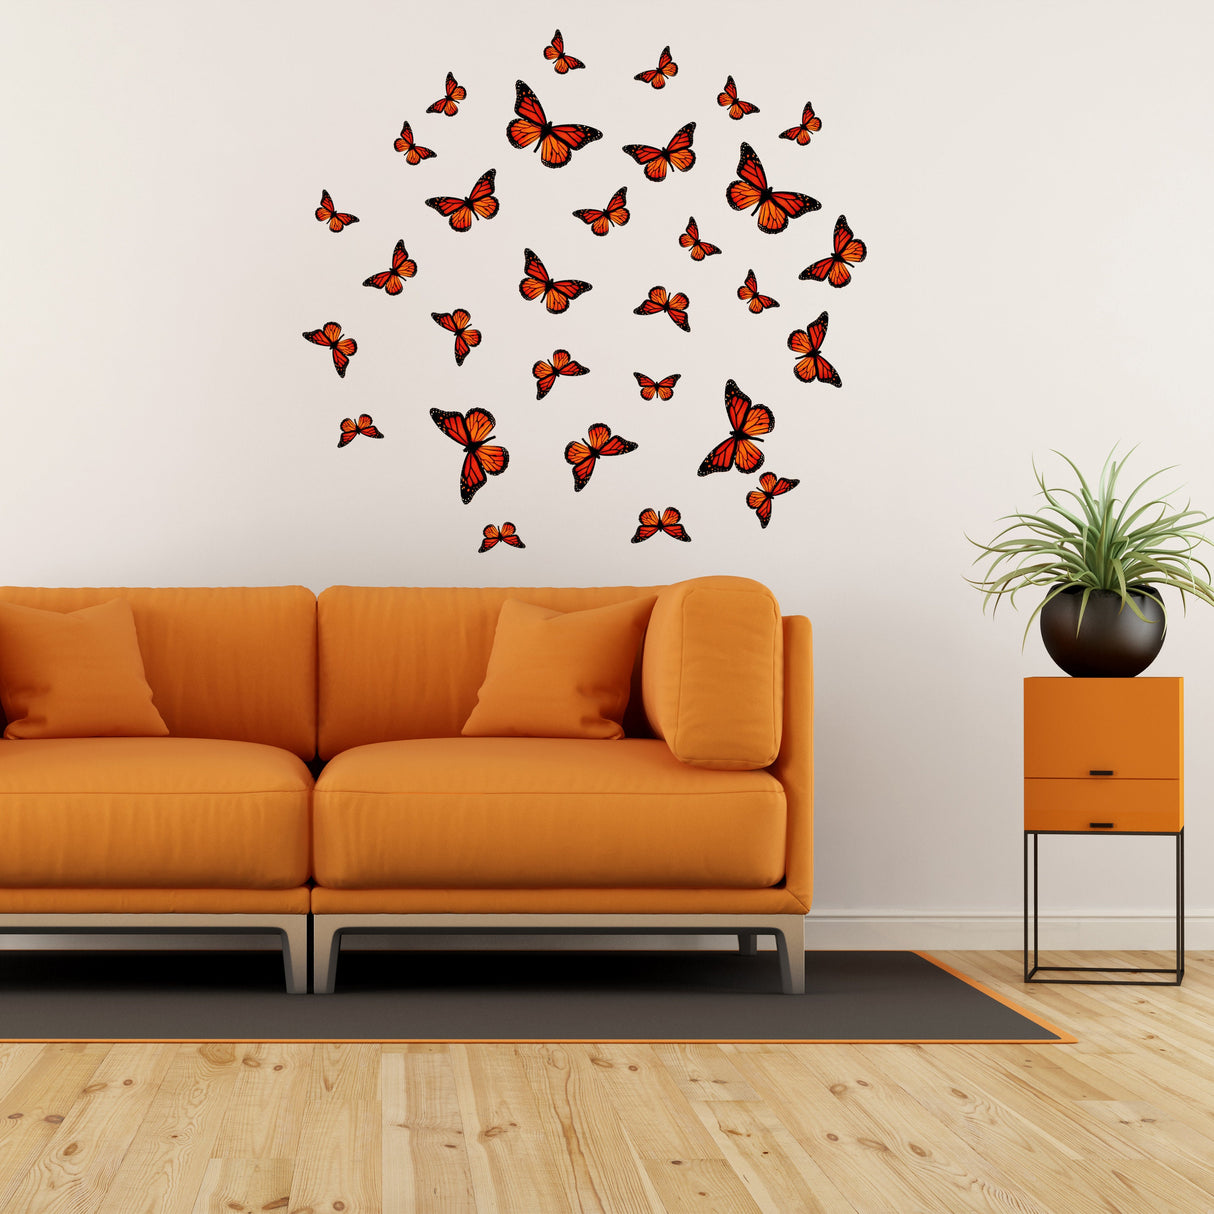 30 Butterfly Wall Decor Stickers - Art Decorations Decals For Girl Room Bedroom